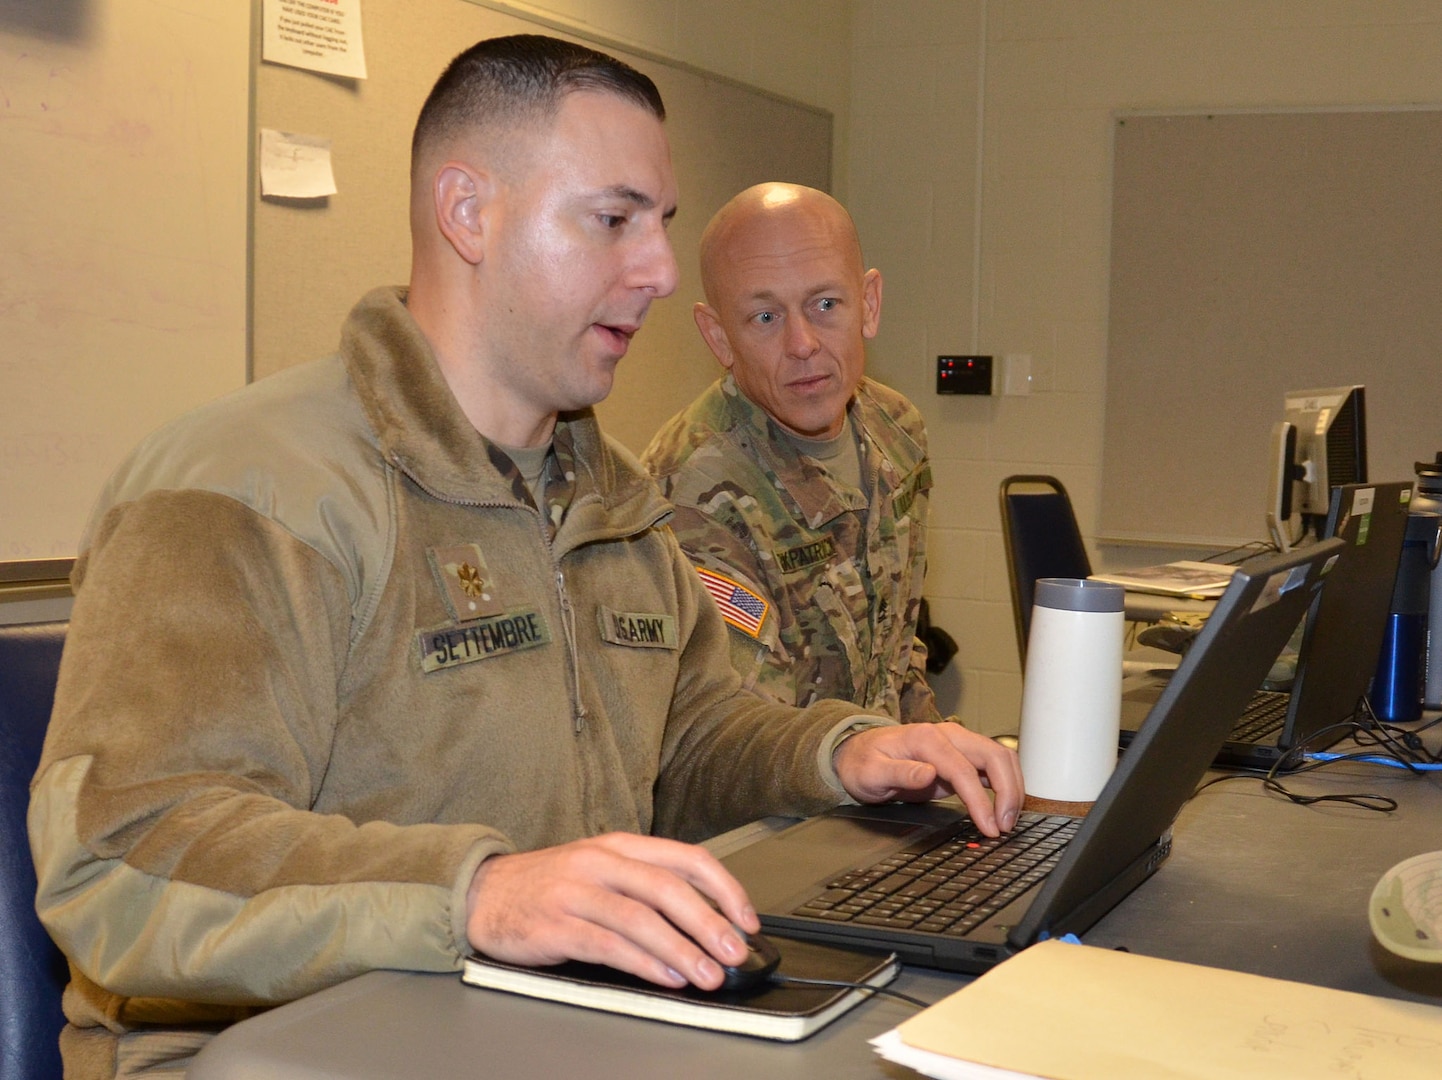 Sgt. 1st Class Bonifacio Magdaleno (right) and Maj. Joe Cederstrom evaluate contracting support during a humanitarian assistance disaster relief exercise Feb. 8 at Joint Base San Antonio-Camp Bullis. Magdaleno is assigned to the 418th Contracting Support Brigade at Fort Hood, Texas, and Cederstrom is a full-time Texas Army National Guardsman with the 1936th Contingency Contracting Battalion from Camp Mabry, near Austin, Texas.